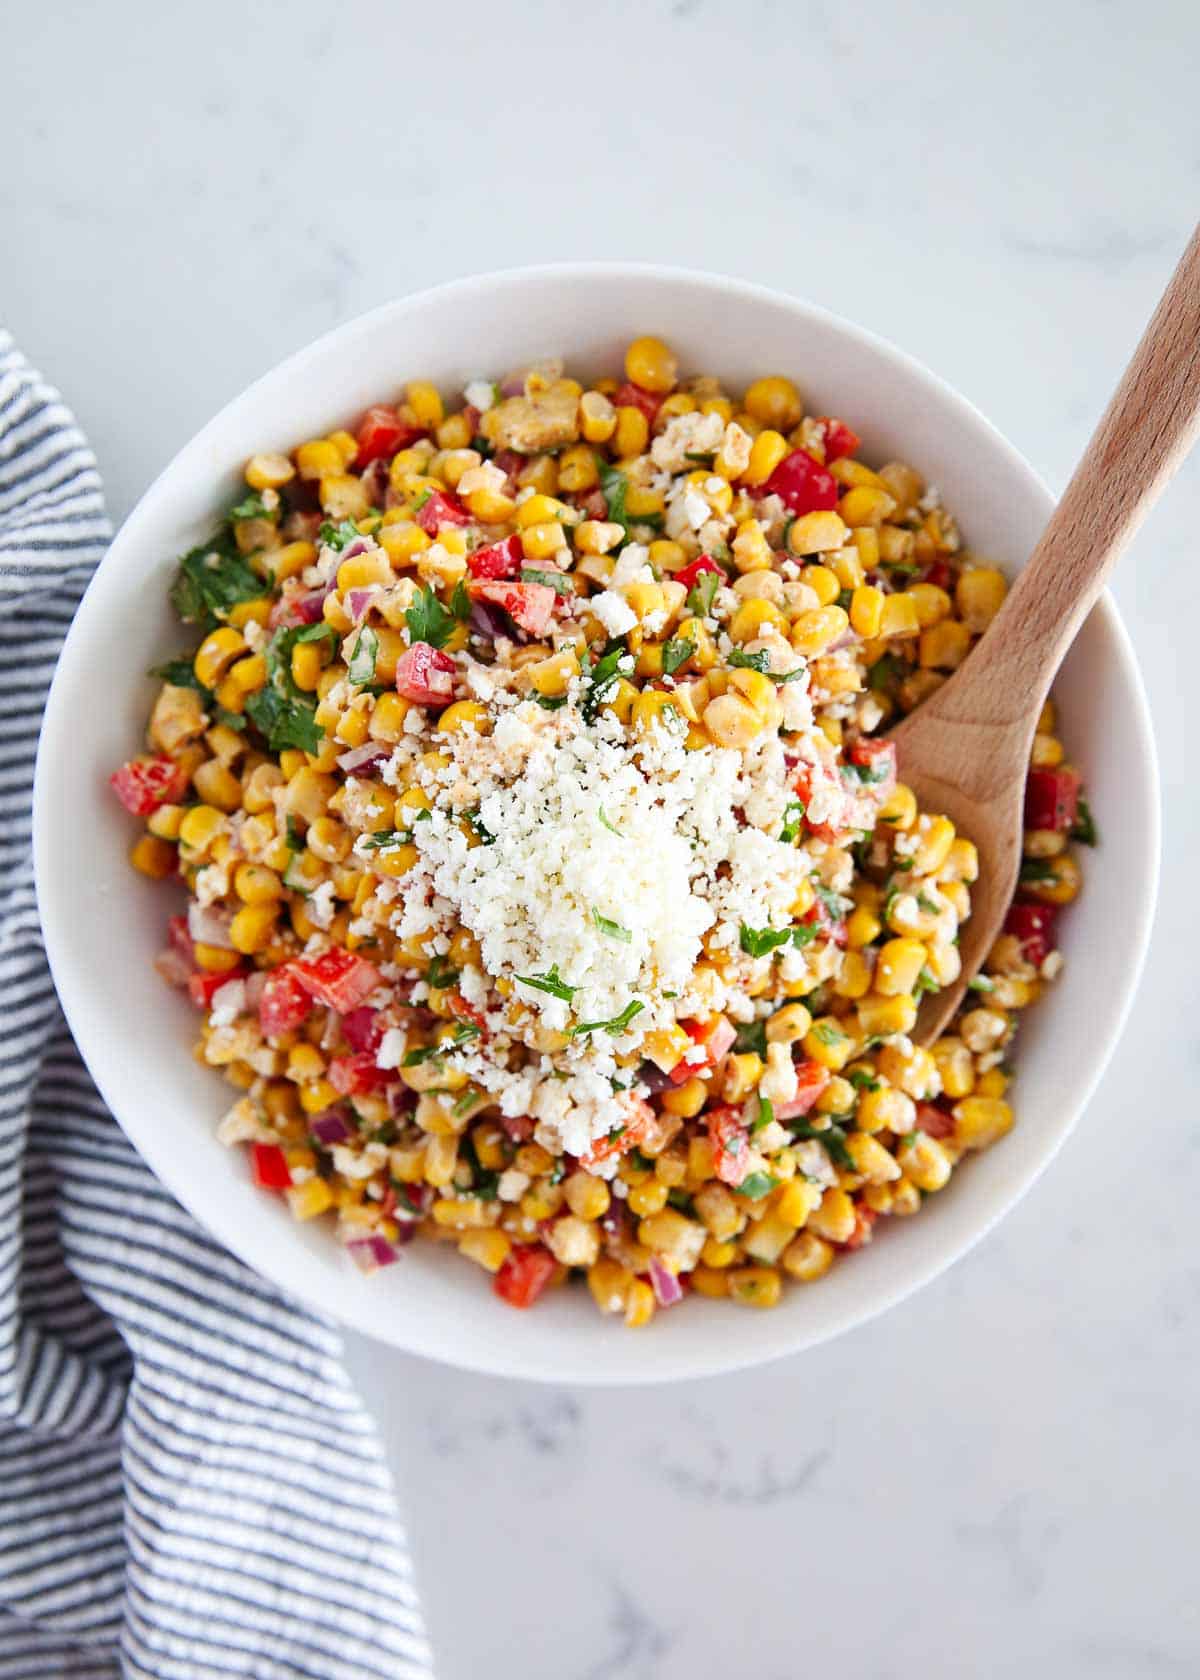 Mexican street corn salad in a white bowl with serving spoon.